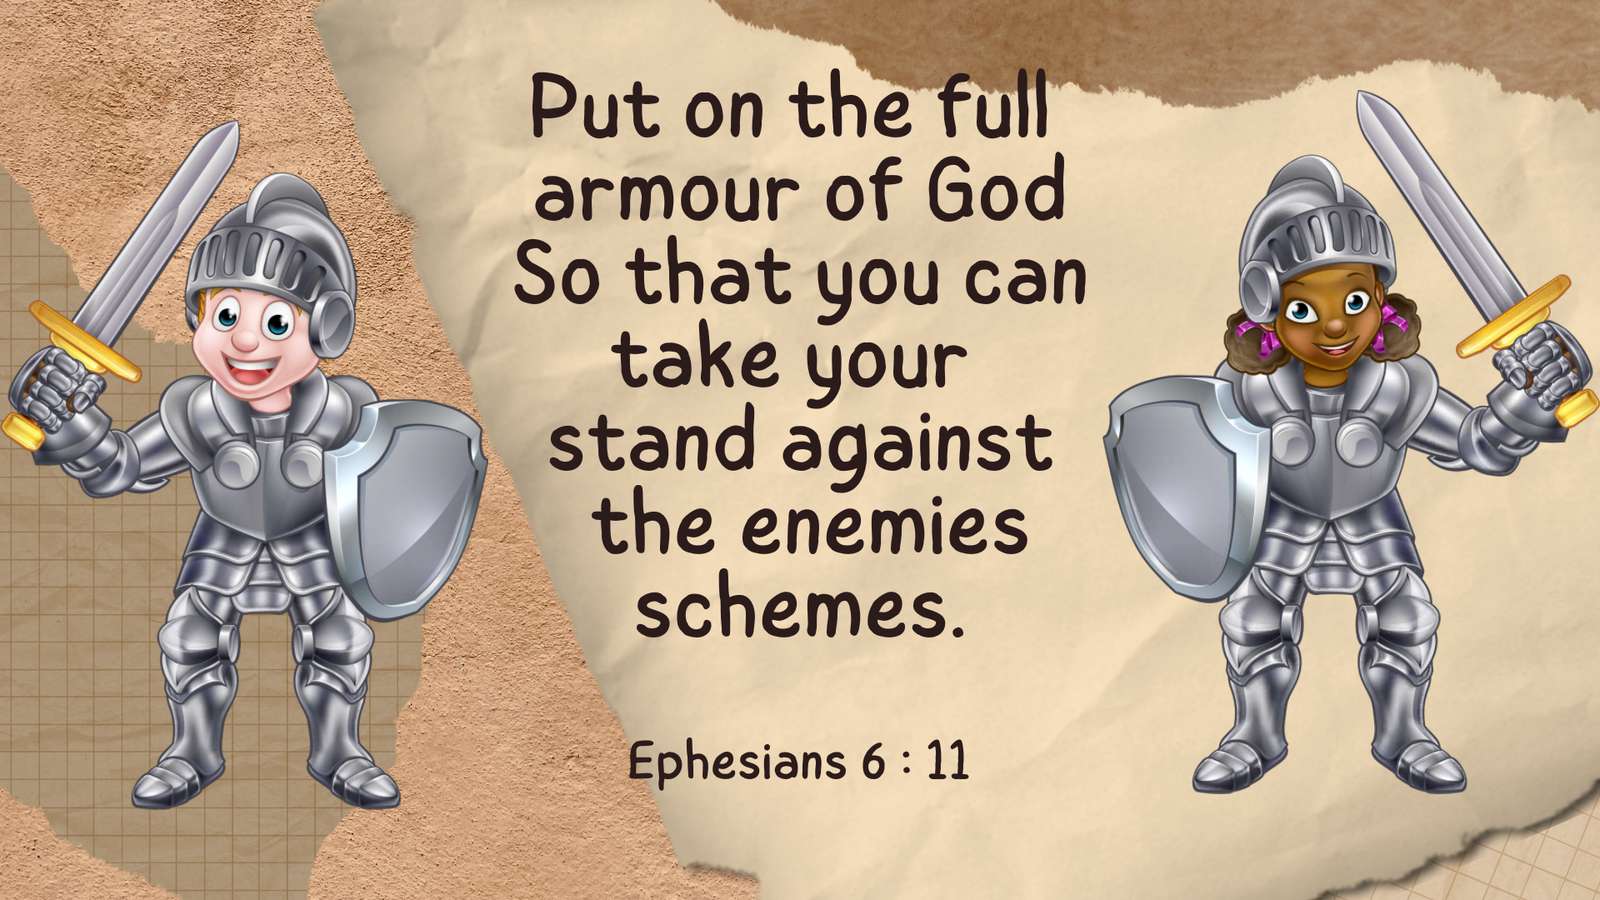 Armour of God puzzle online from photo